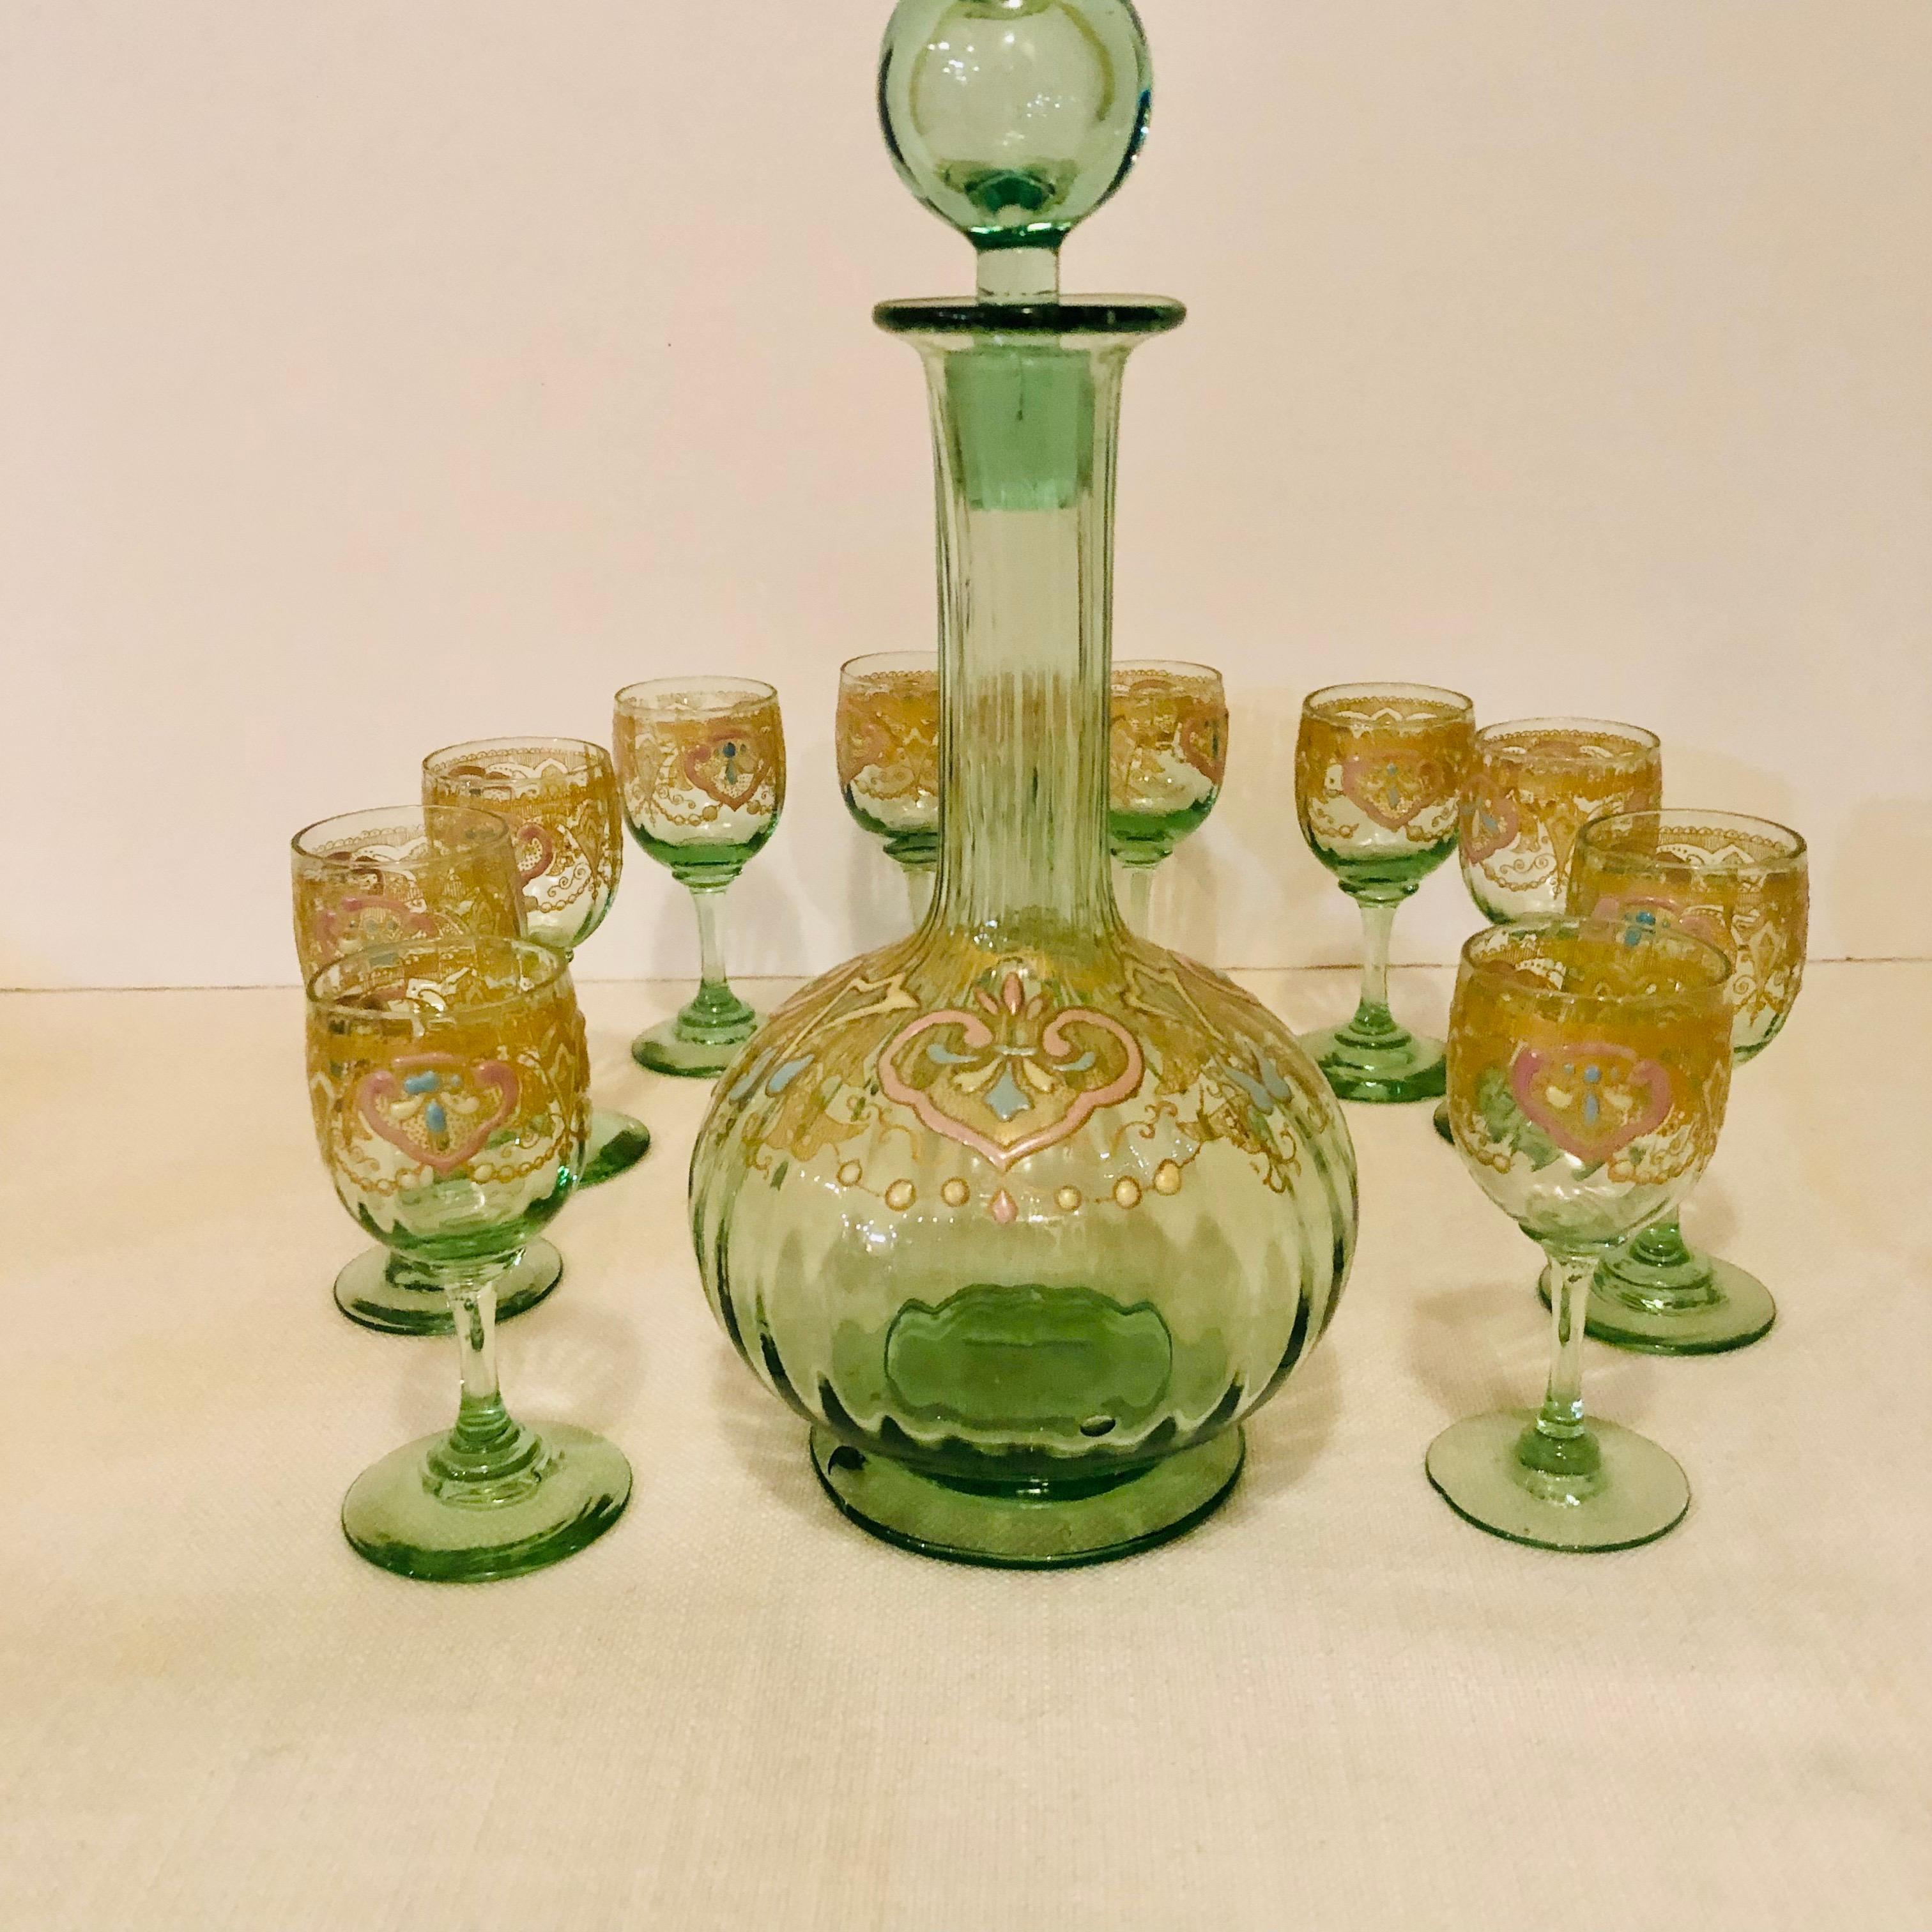 Venetian Decanter With Ten Venetian Cordial Glasses With Colorful Enamel Accents 6